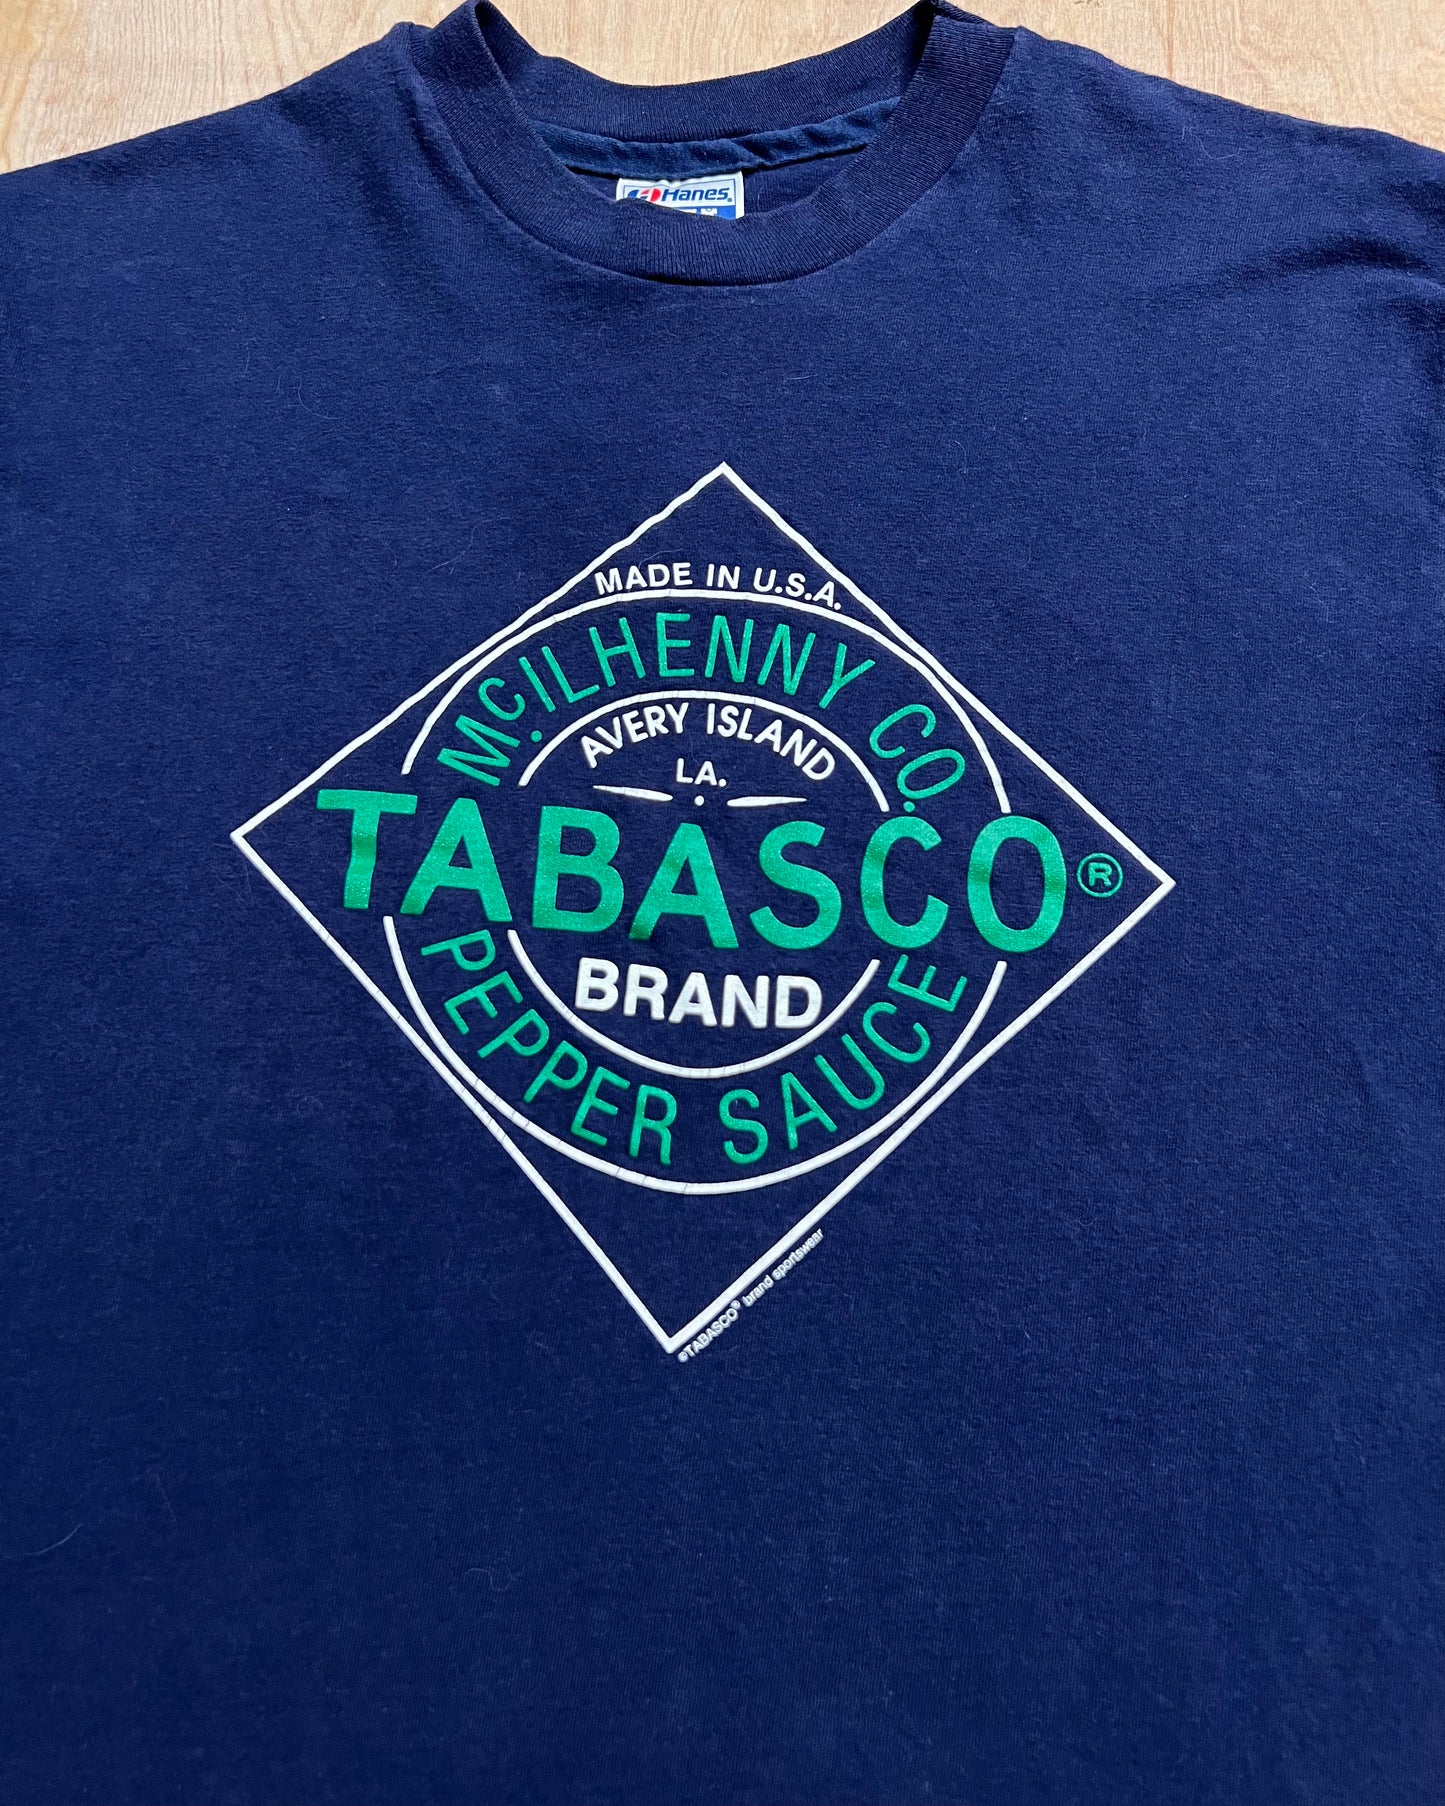 Early 1990's Tabasco Pepper Sauce Single Stitch T-Shirt